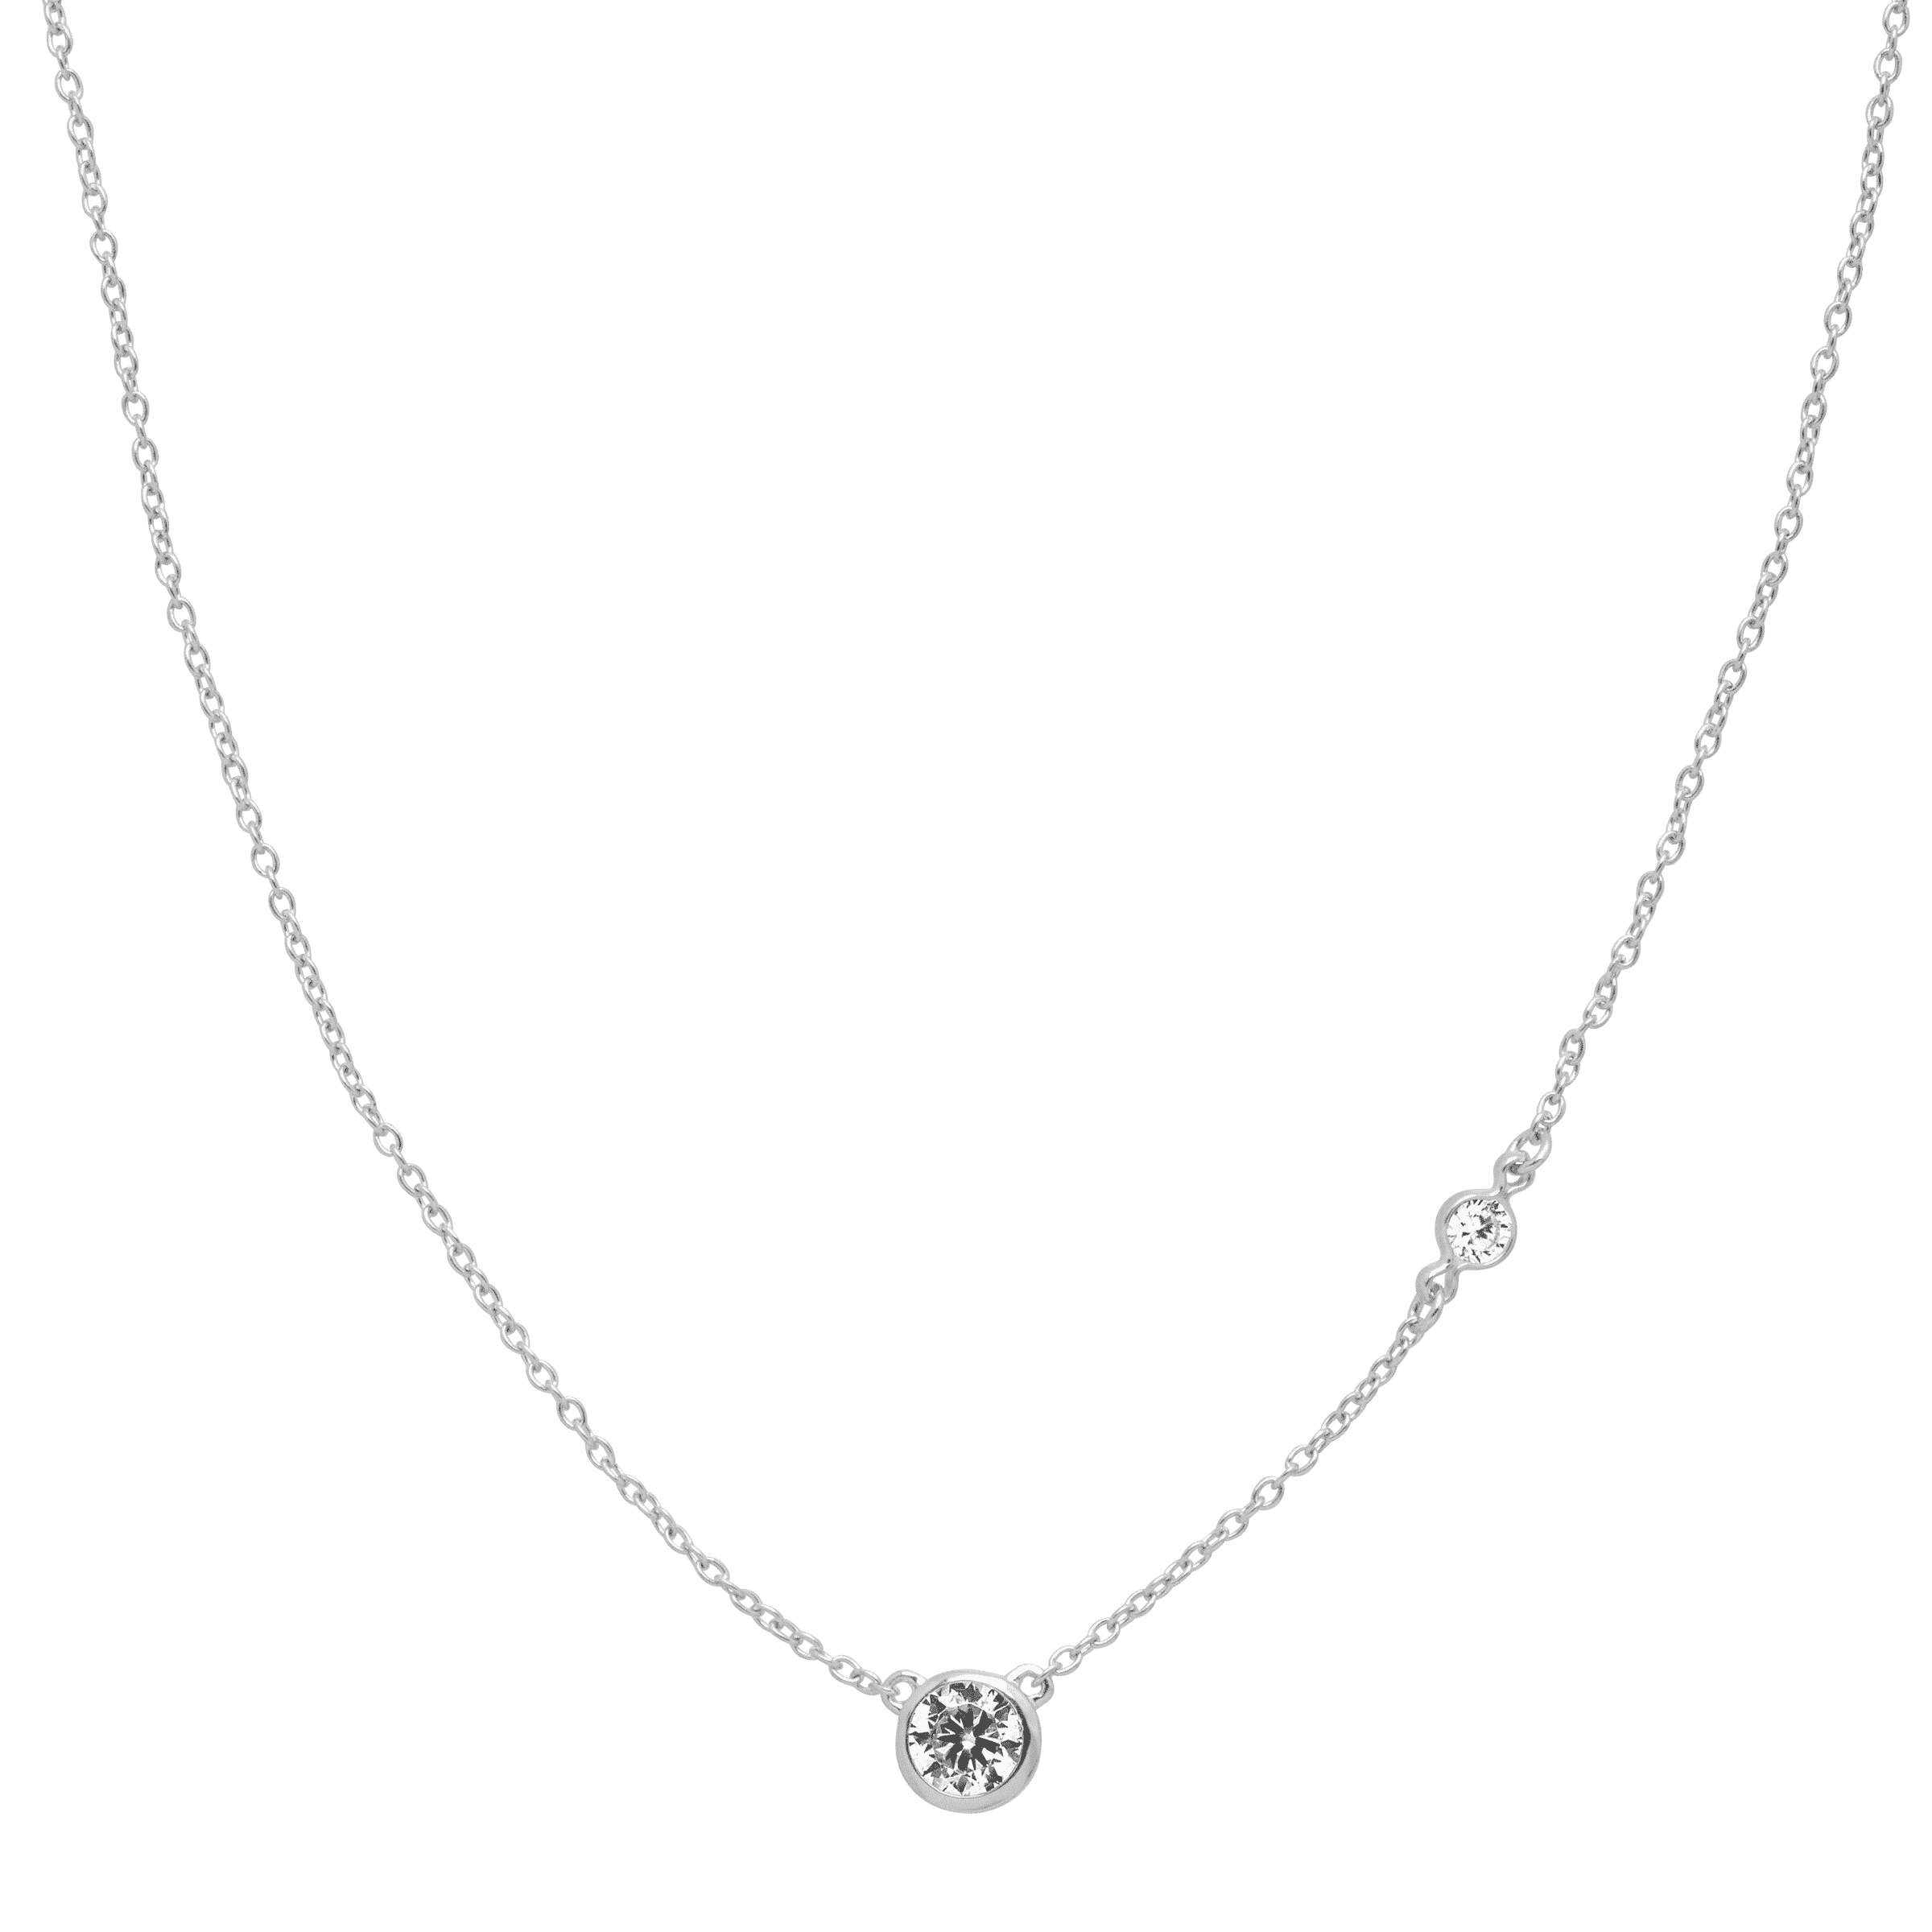 Silpada 'Marvel' Cubic Zirconia Necklace in Sterling Silver, 16